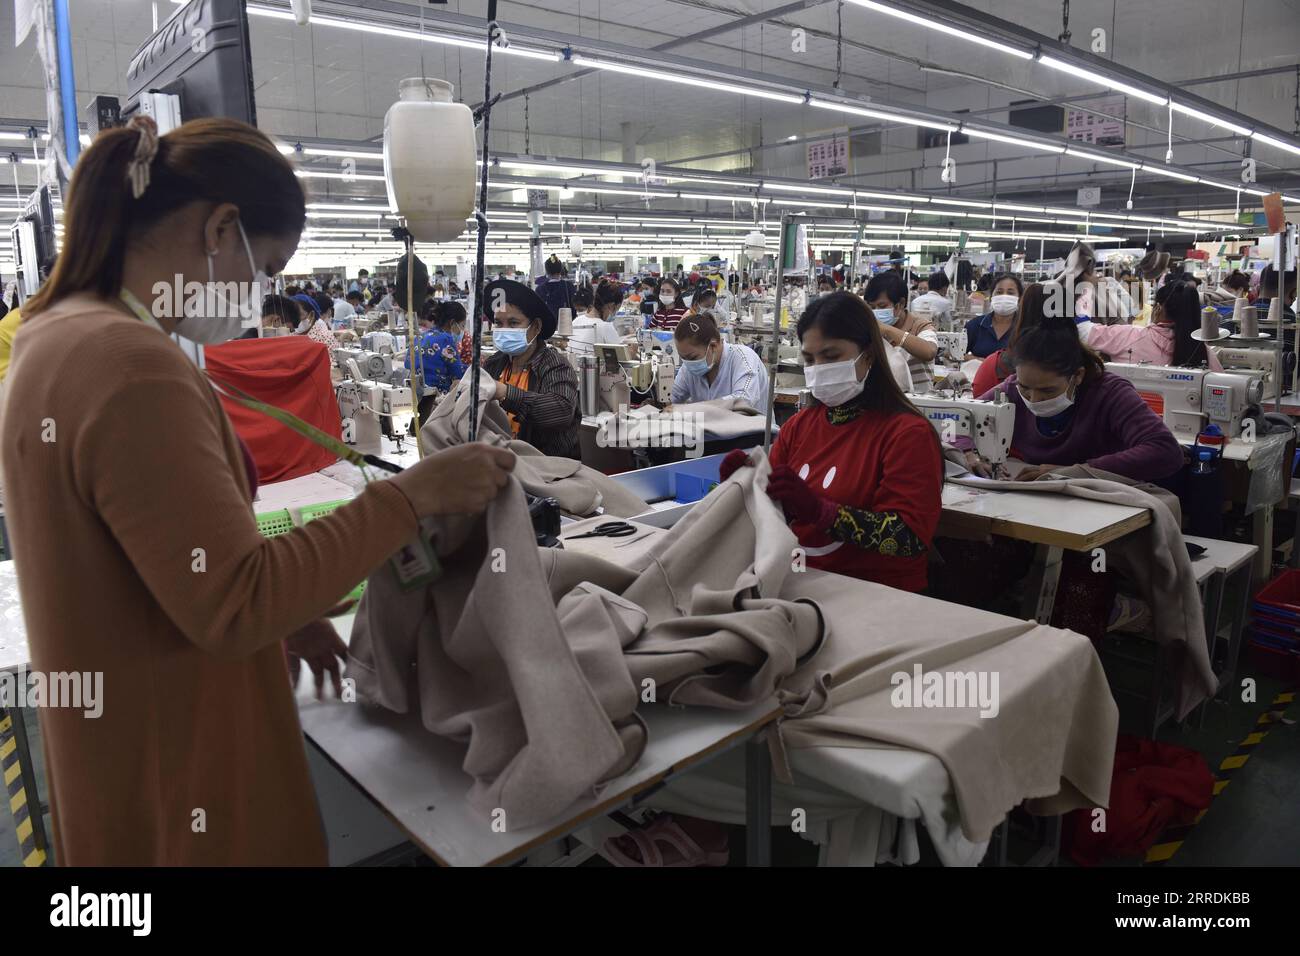 211231 -- PHNOM PENH, Dec. 31, 2021 -- Garment workers make clothes at a factory in Phnom Penh, Cambodia on Dec. 17, 2021. Officials and experts said Cambodia has pinned high hope on the Regional Comprehensive Economic Partnership RCEP and the Cambodia-China Free Trade Agreement CCFTA to boost its economic growth in the post-COVID-19 pandemic era. The two free trade deals are due to enter into force on Jan. 1, 2022. Enjoy Ho, deputy chairman of the Garment Manufacturers Association in Cambodia, said the two deals would bring about better development for Cambodia s textile and garment industry Stock Photo